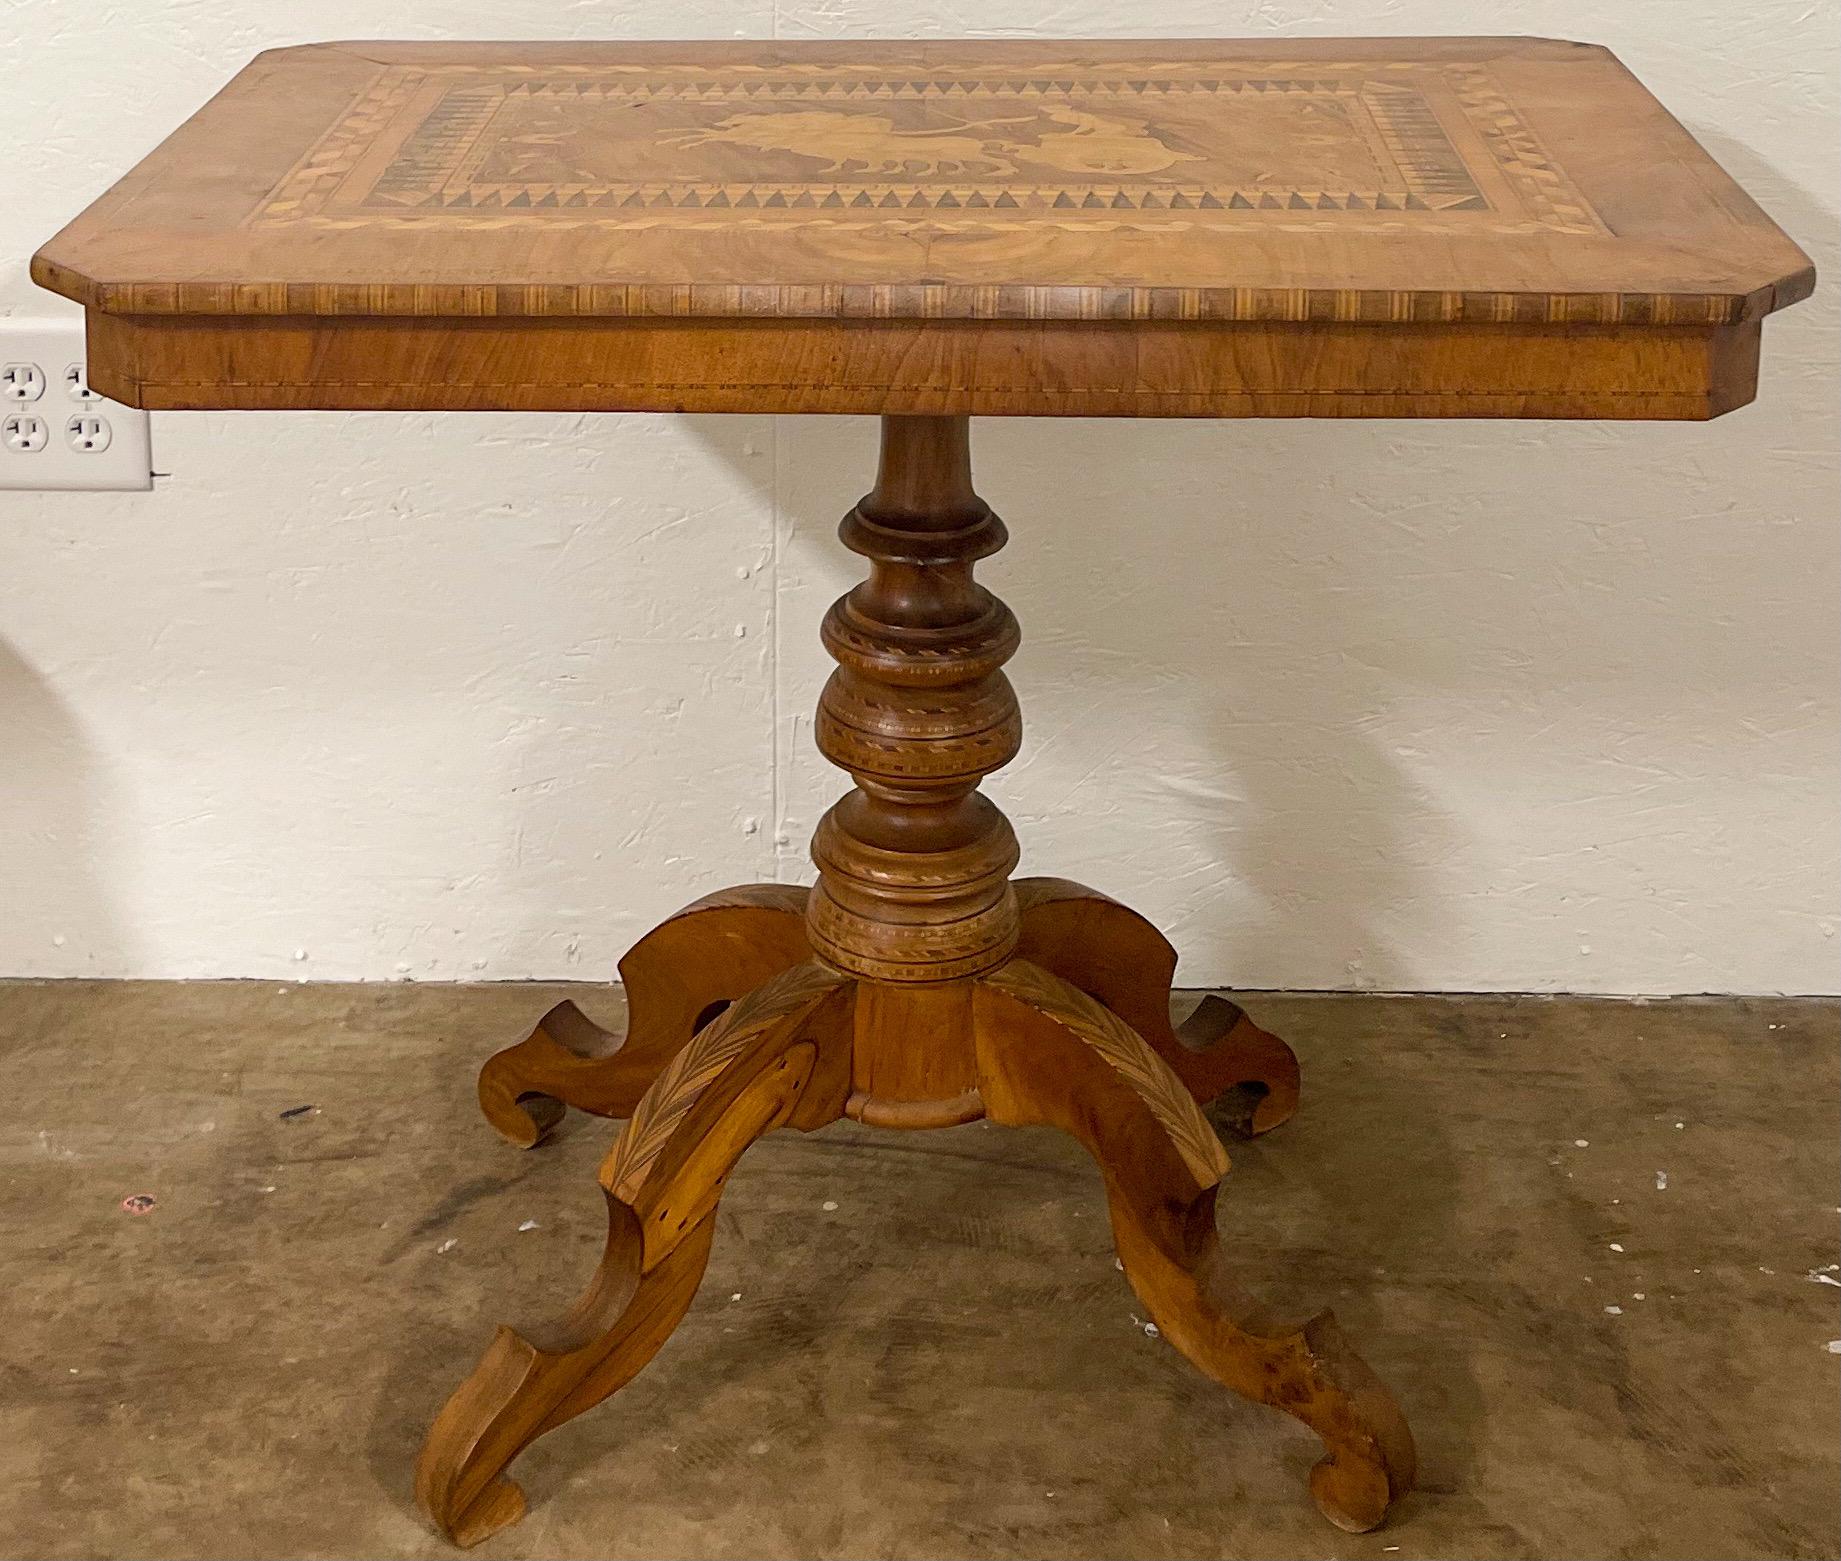 Neoclassical 19th-C. Neo-Classical Style Italian Inlaid Burl & Satinwood Tilt-Top Side Table